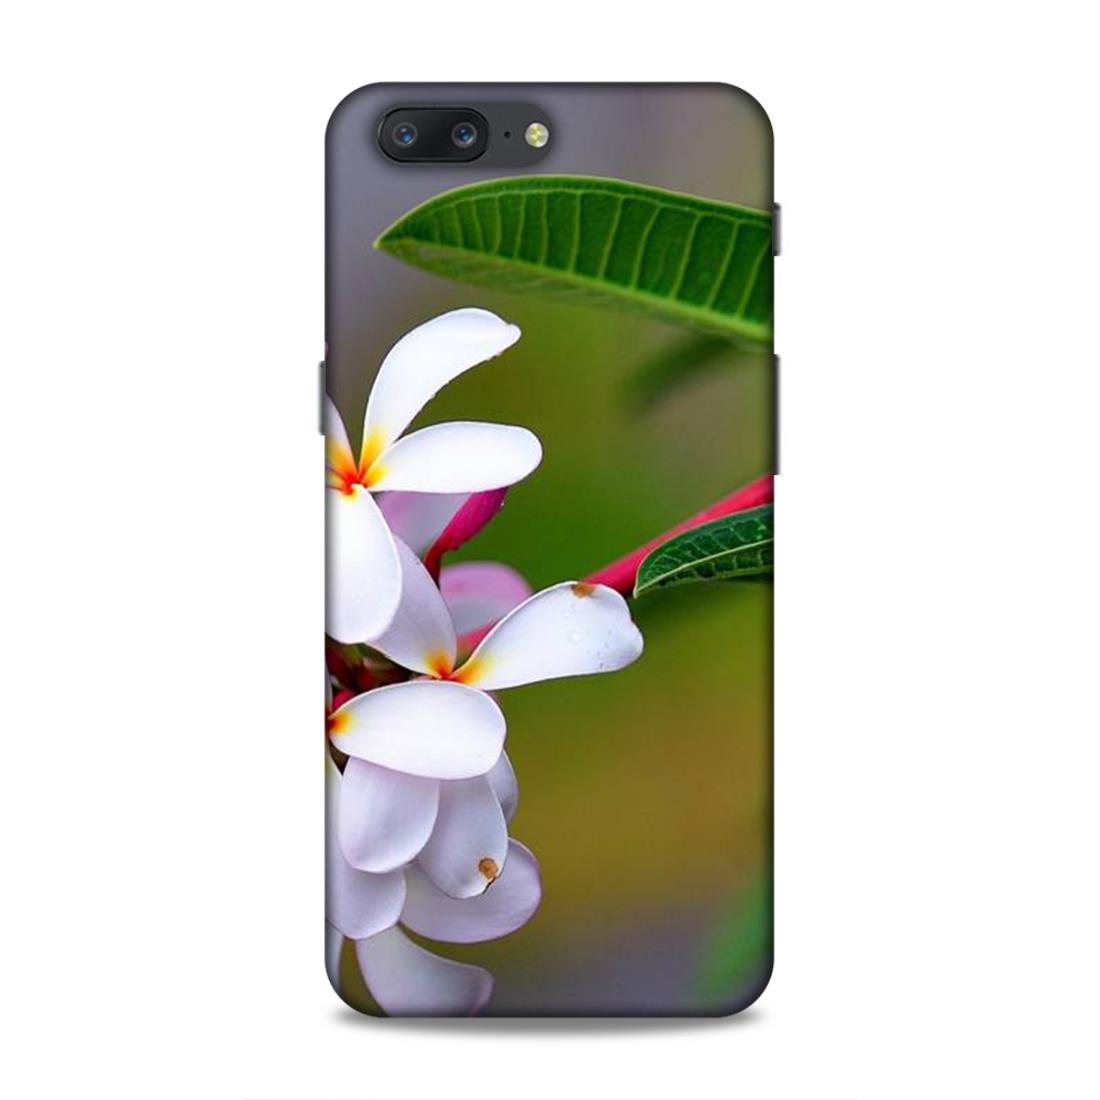 Natural White Flower OnePlus 5 Mobile Cover Case